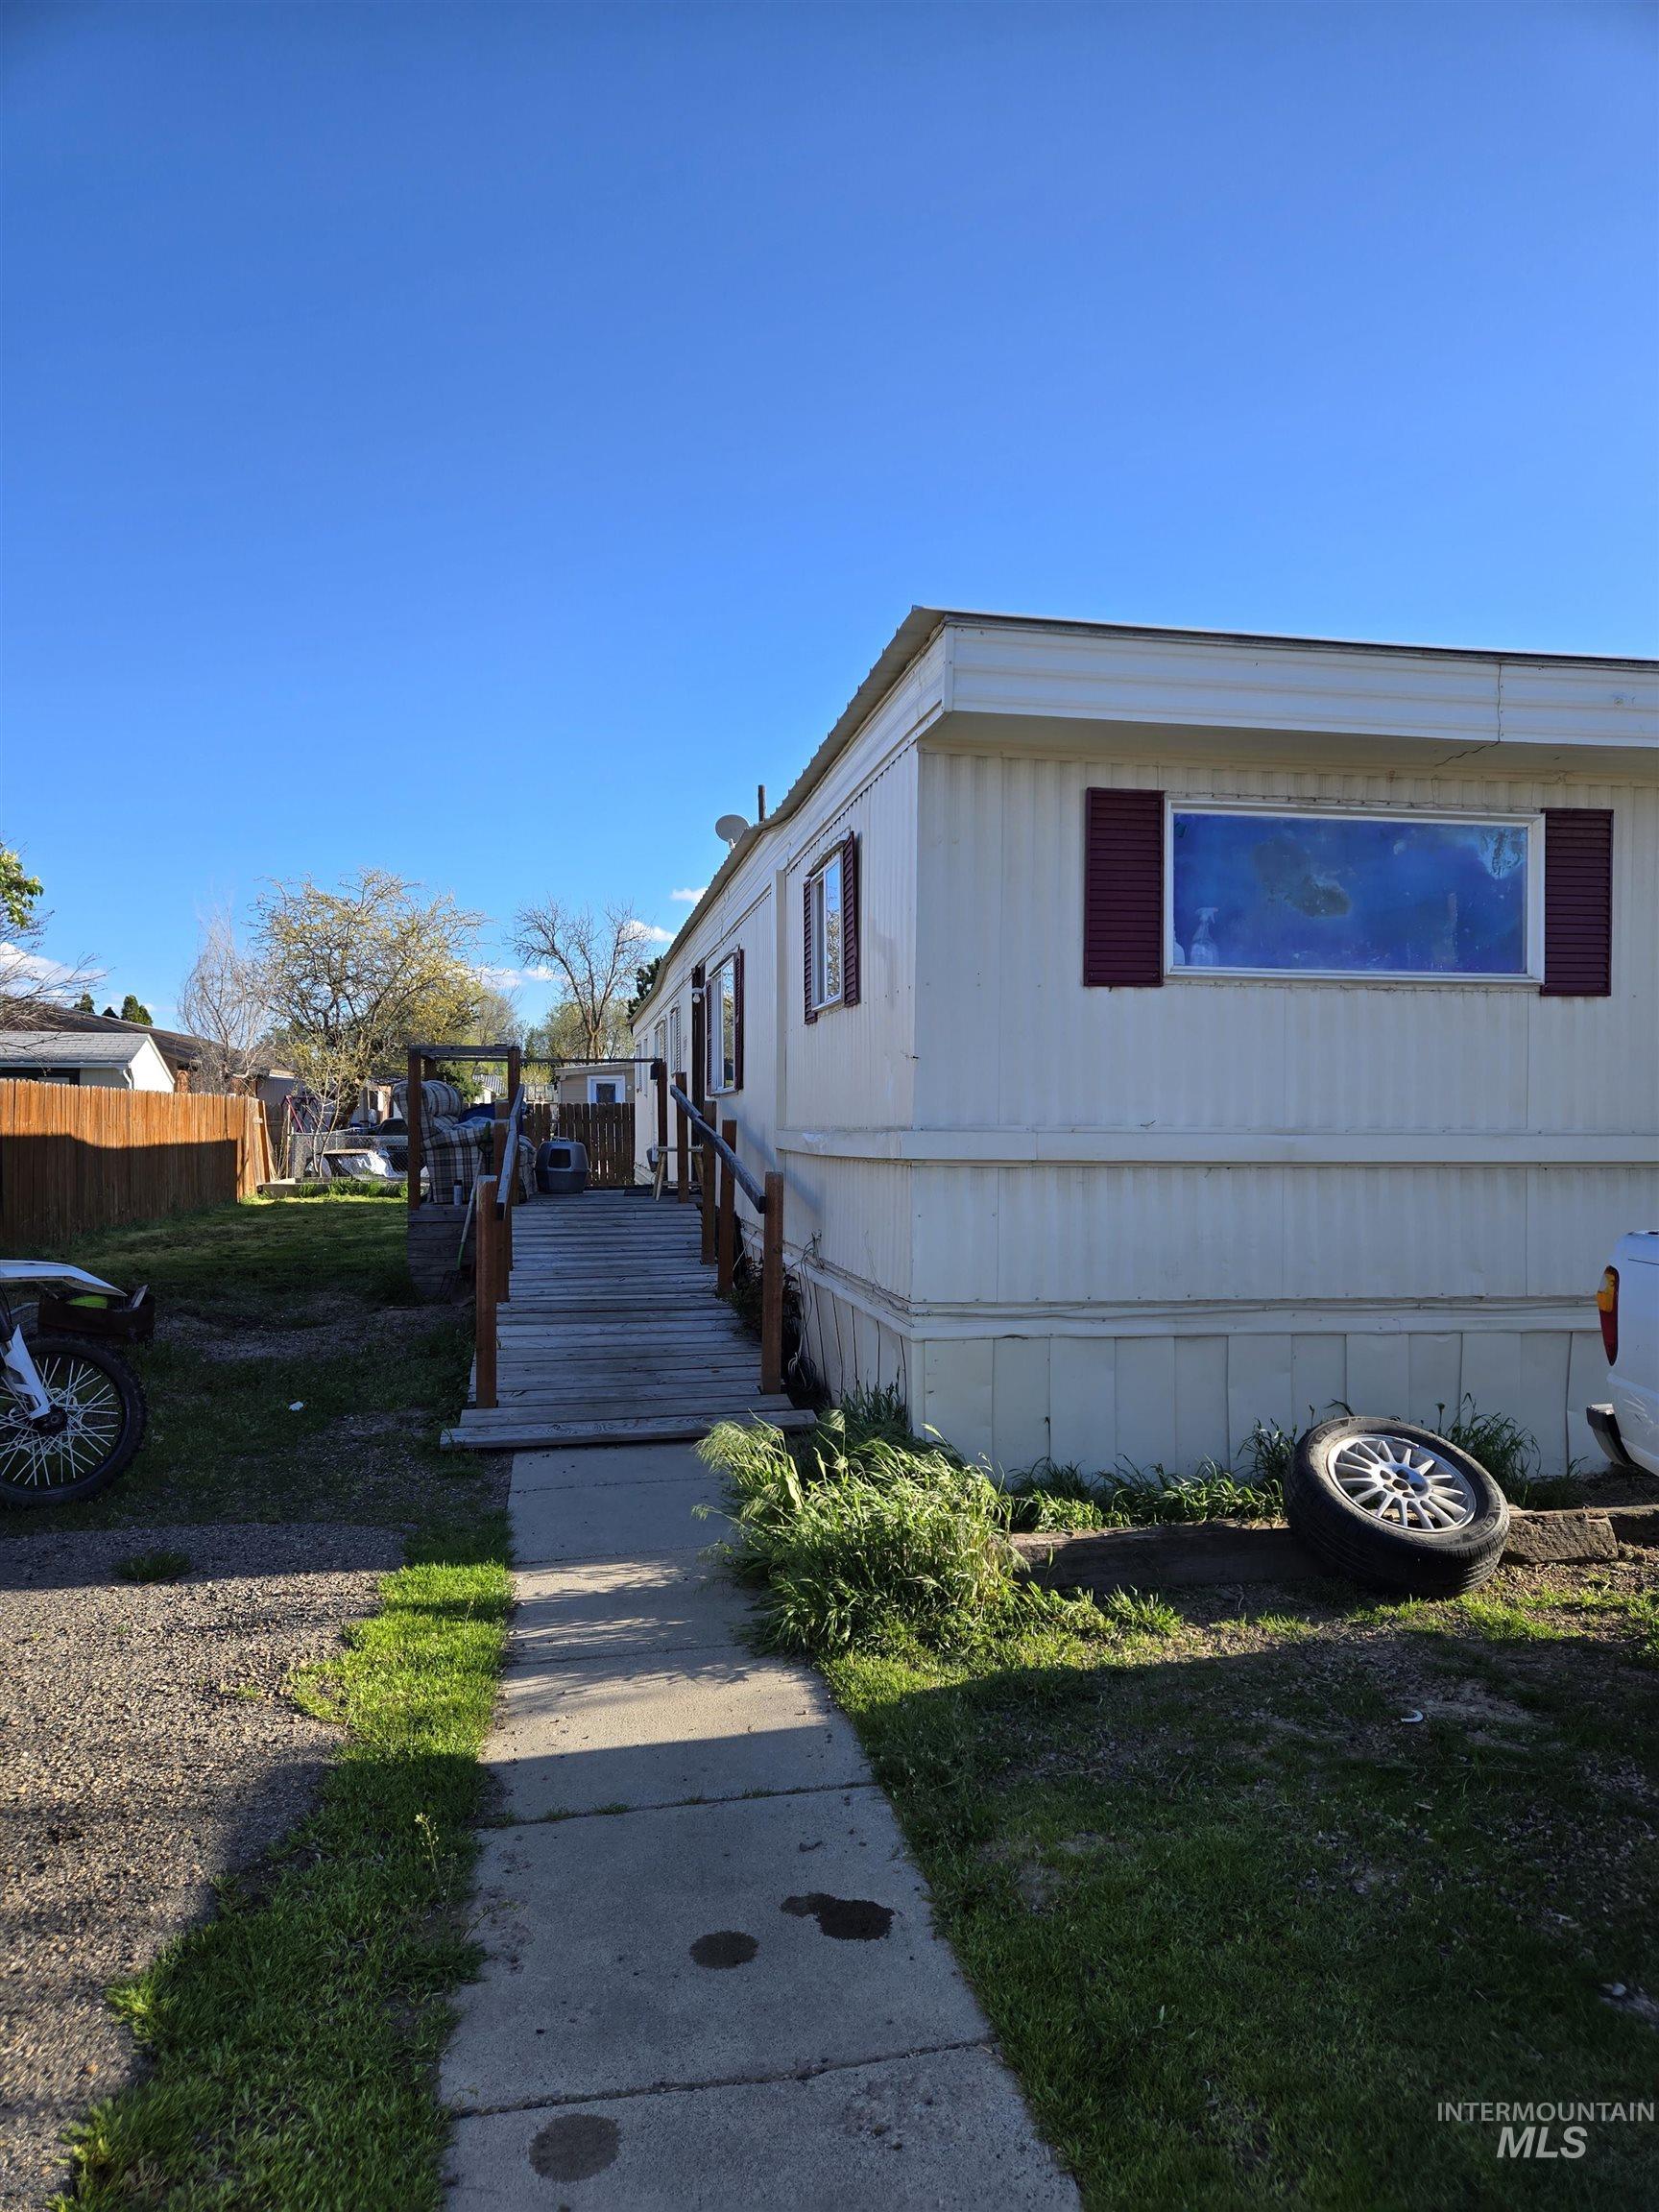 824 NW 3rd St., Fruitland, Idaho 83661, 3 Bedrooms, 1.5 Bathrooms, Residential For Sale, Price $110,000,MLS 98907128